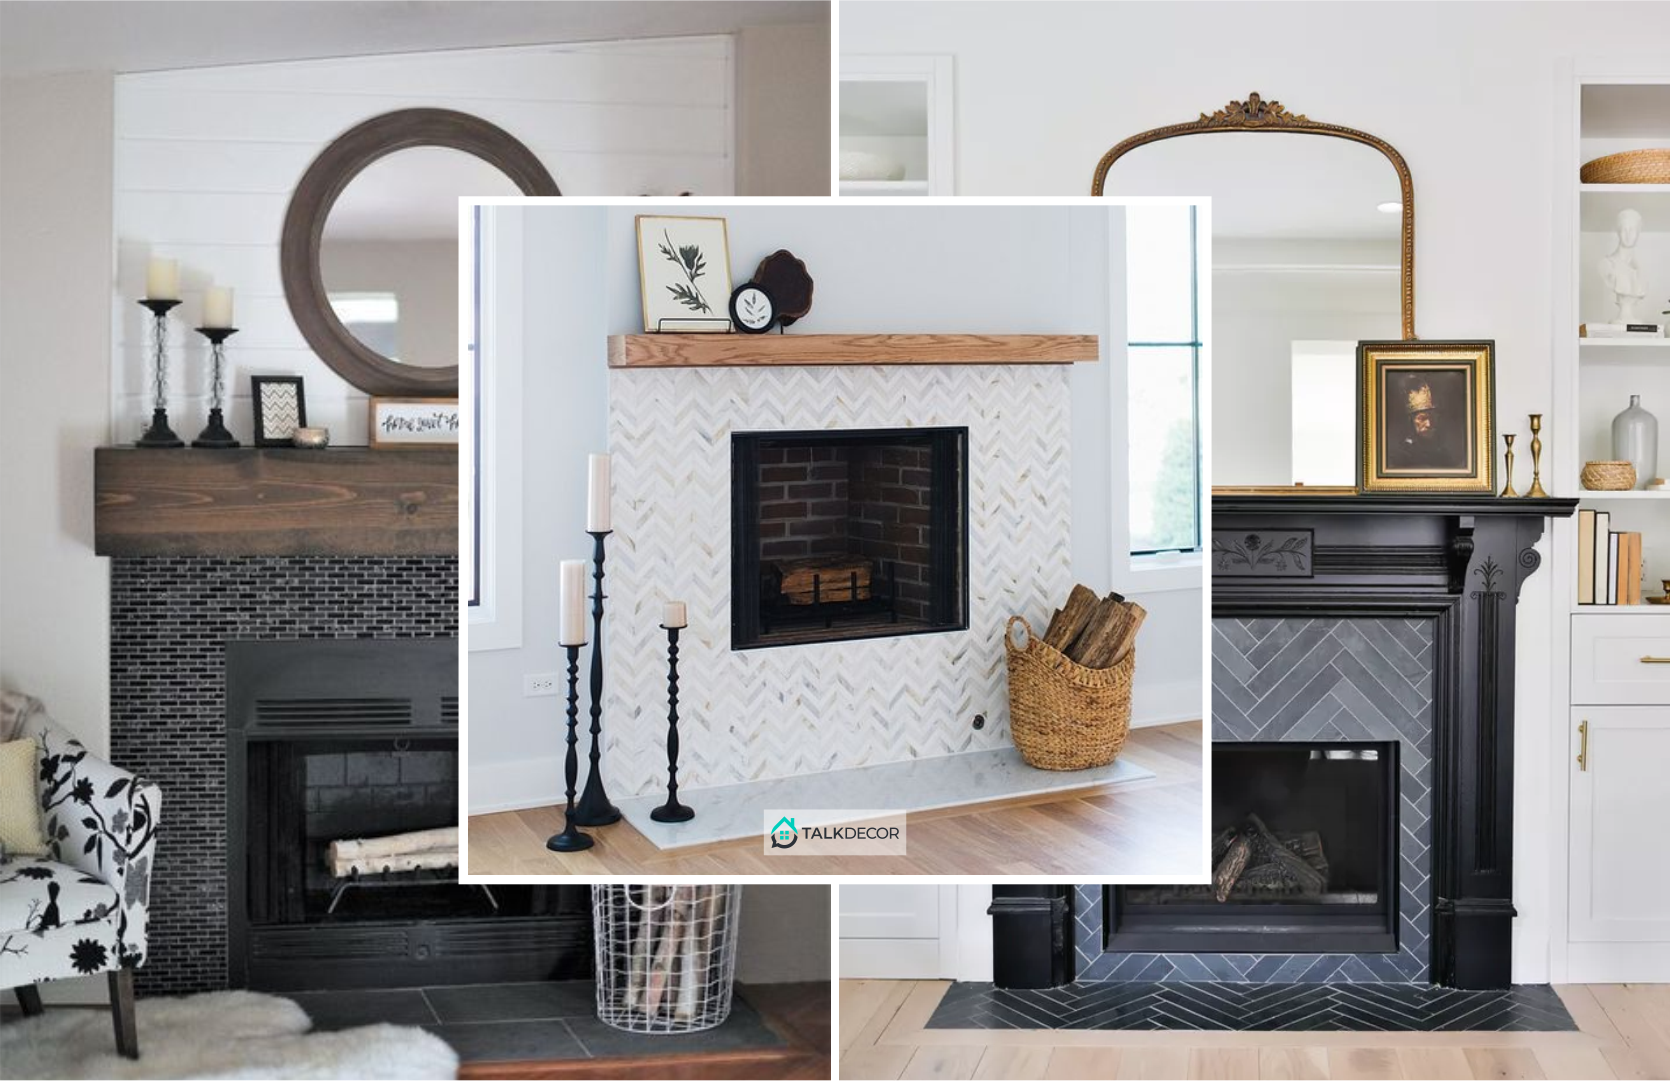 45 Recommended Designs for the Tiled Fireplace